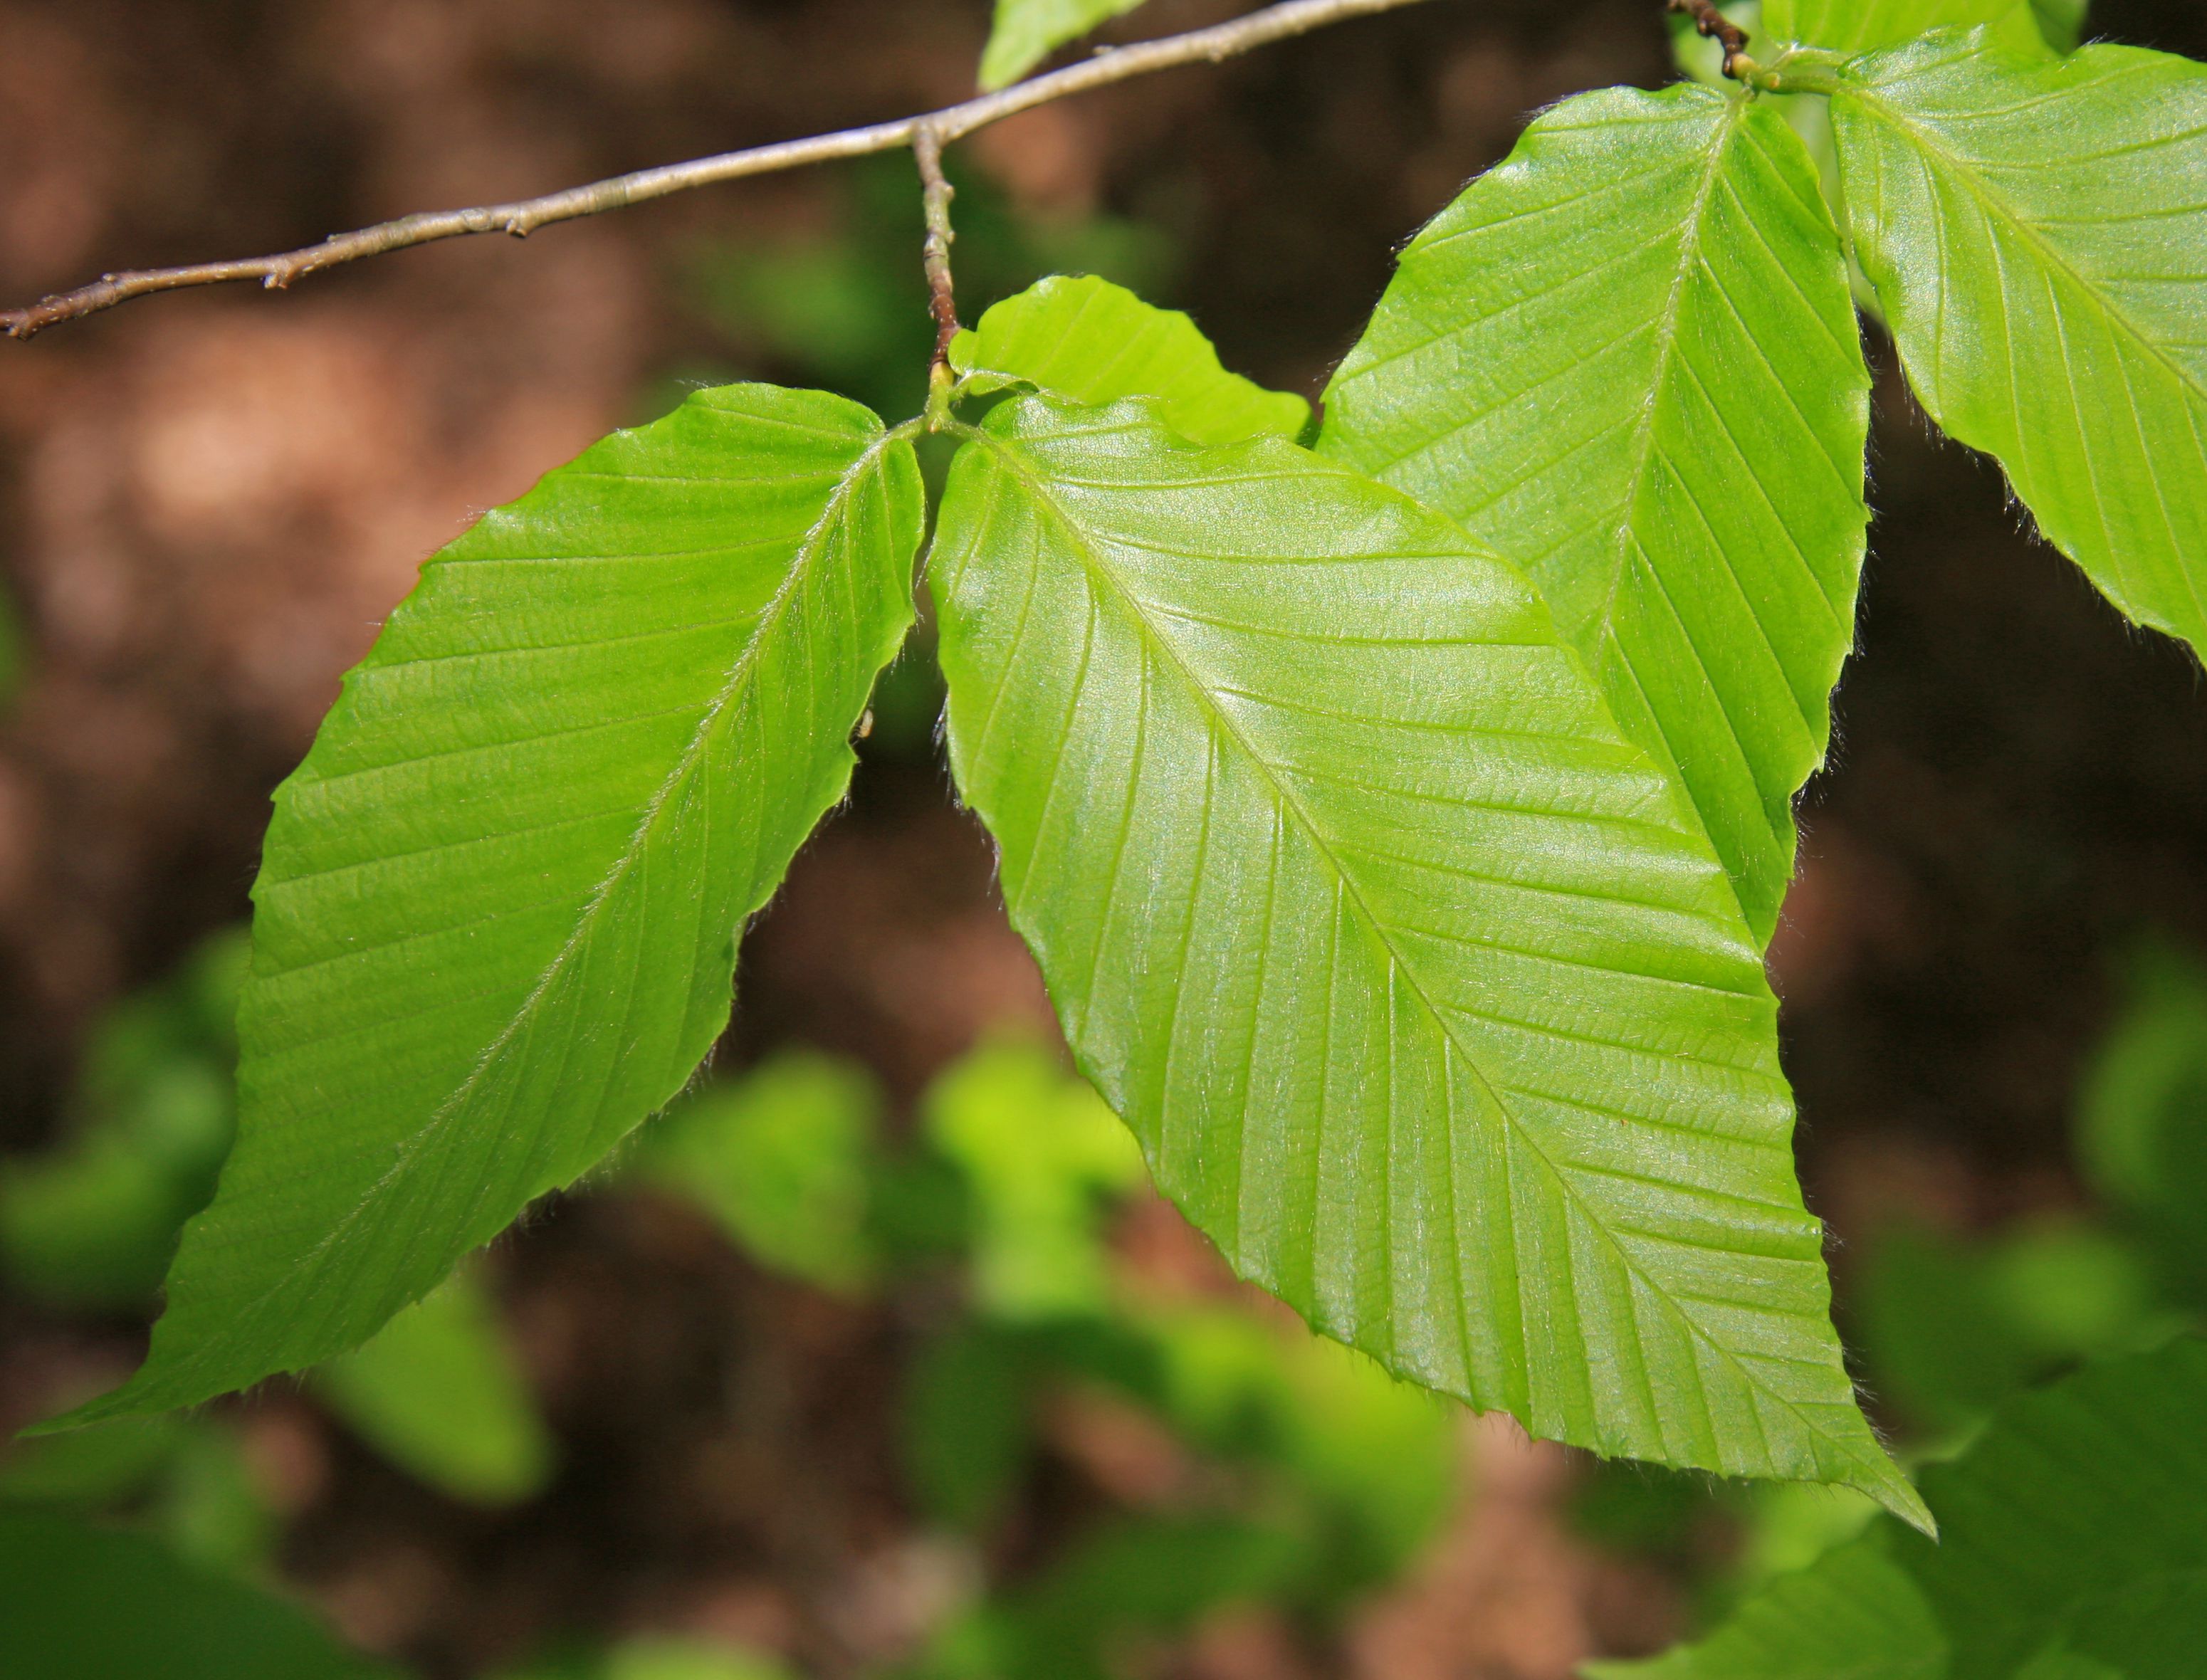 American Beech, a Top 100 Common Tree in North America